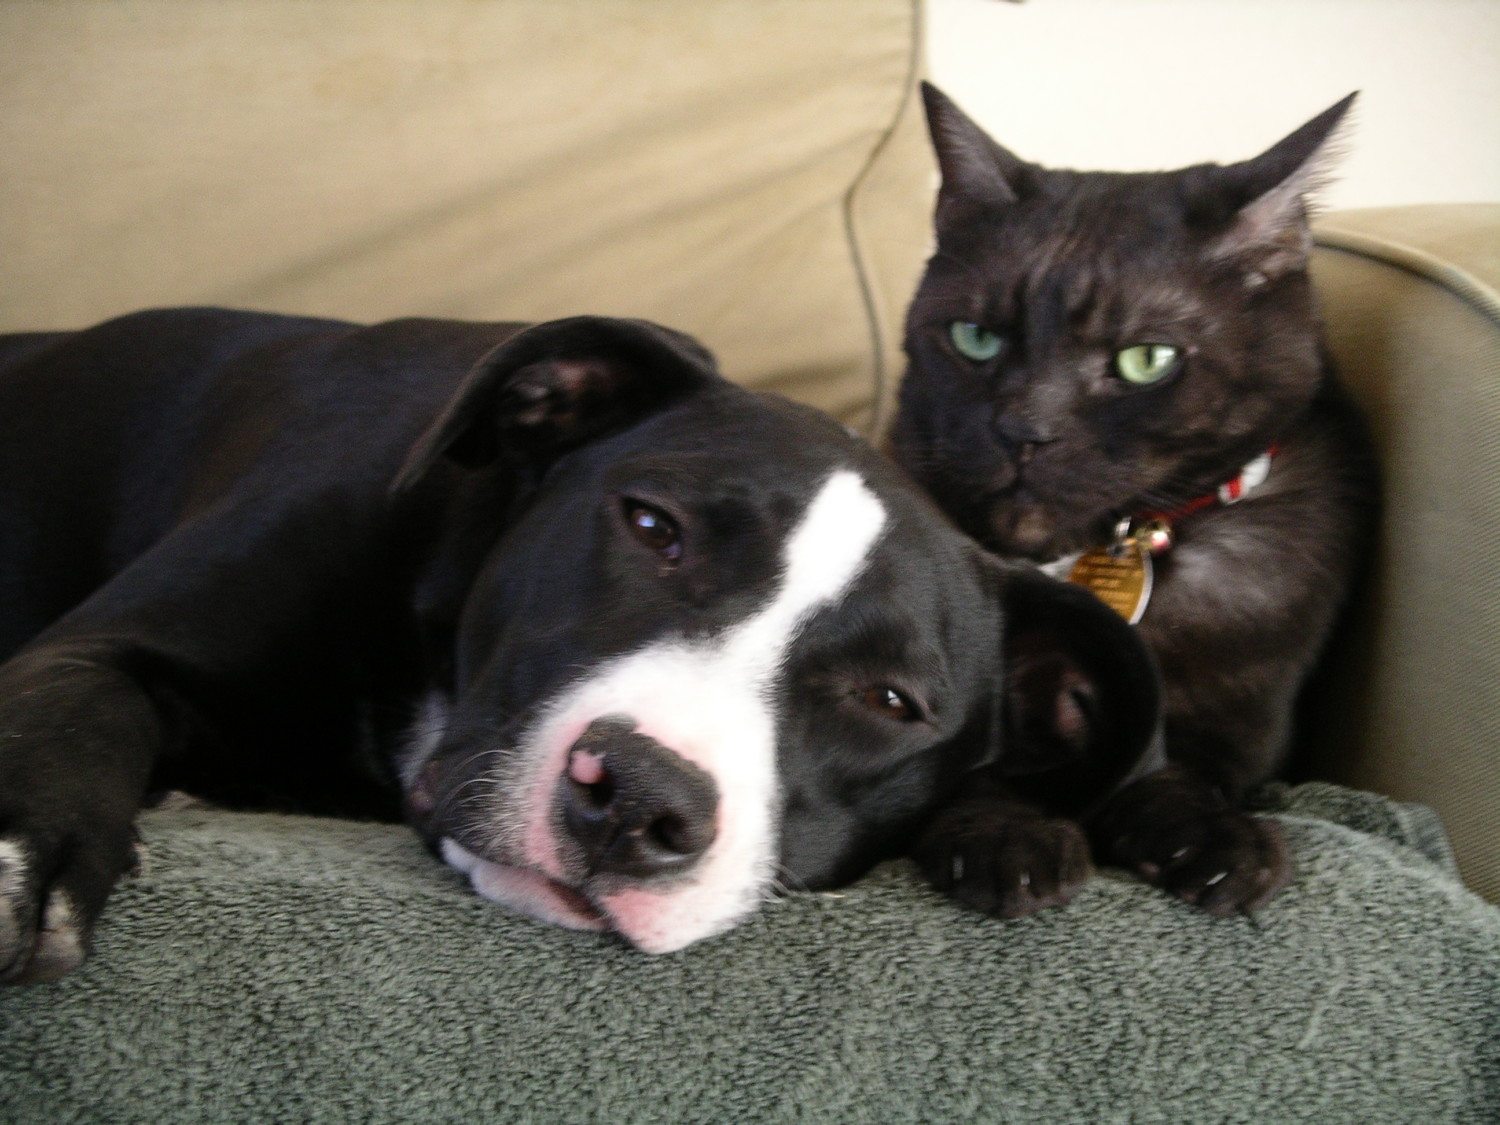 dog and cat photo